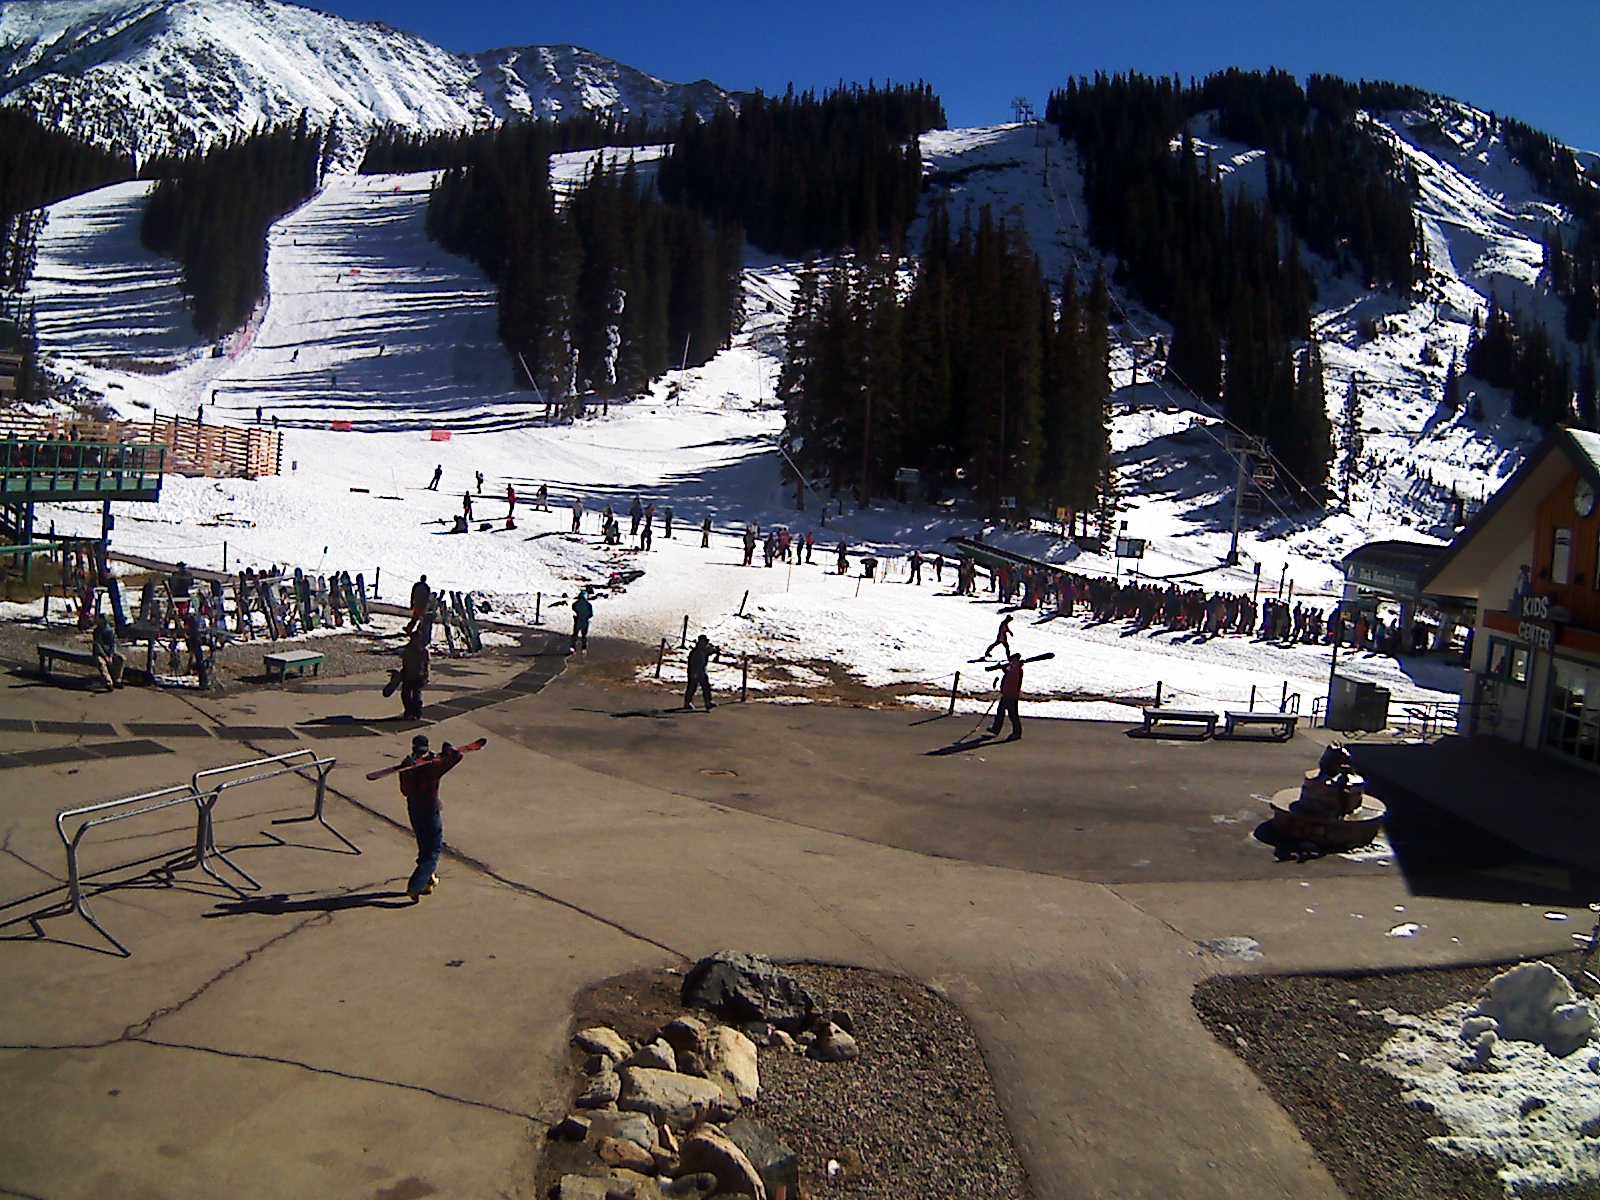 Arapahoe Basin, CO today at 11:30am.